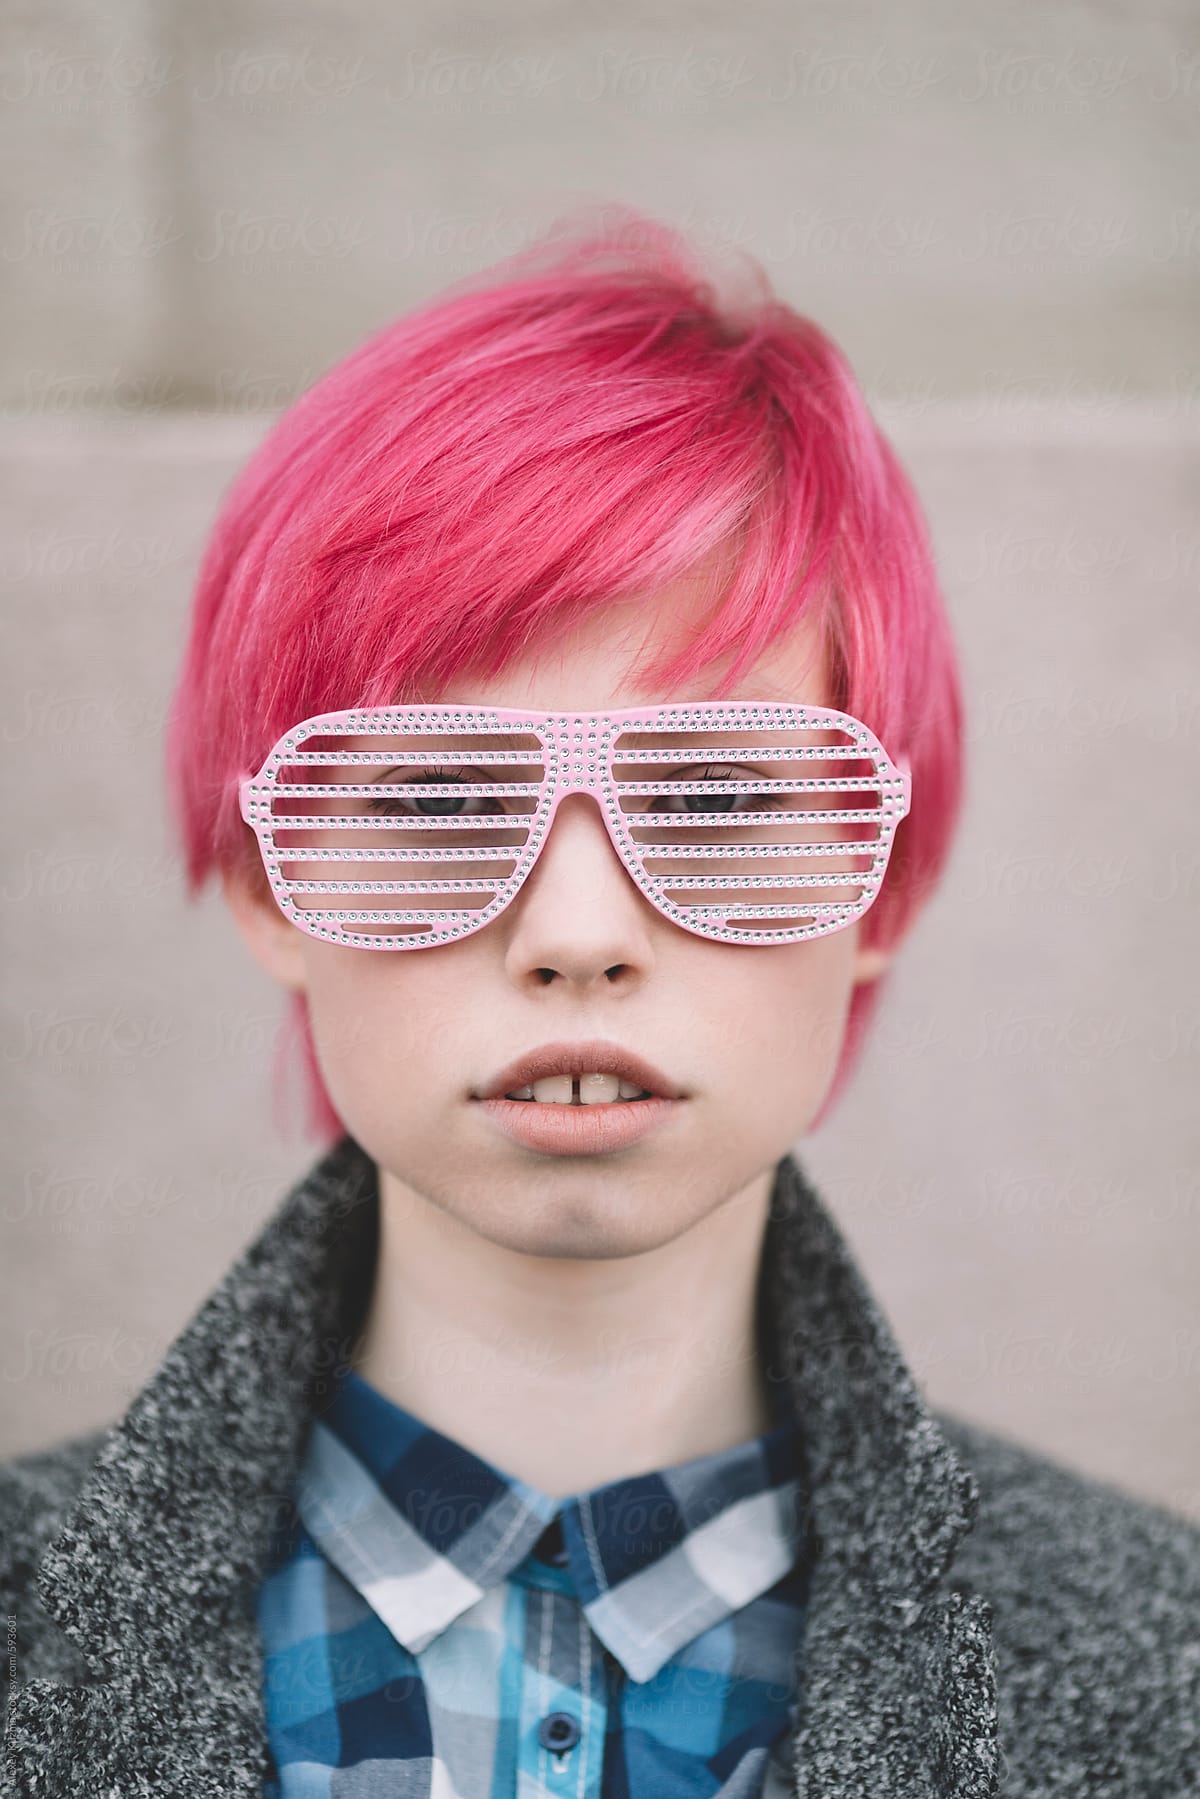 «portrait Of The Girl With Pink Hair And Party Glasses Del